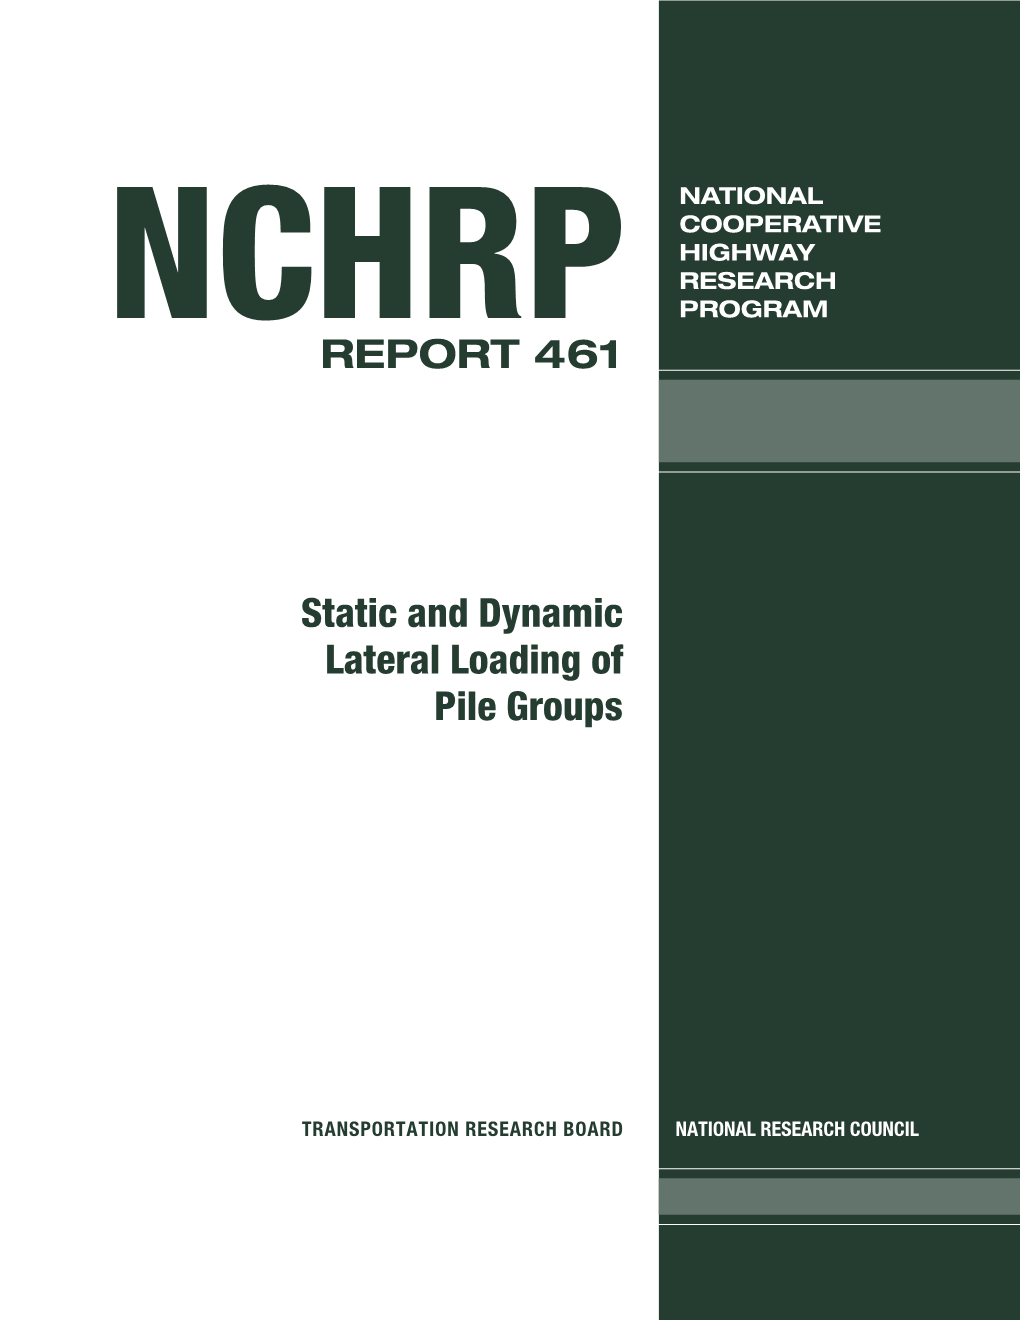 NCHRP Report 461: Static and Dynamic Lateral Loading of Pile